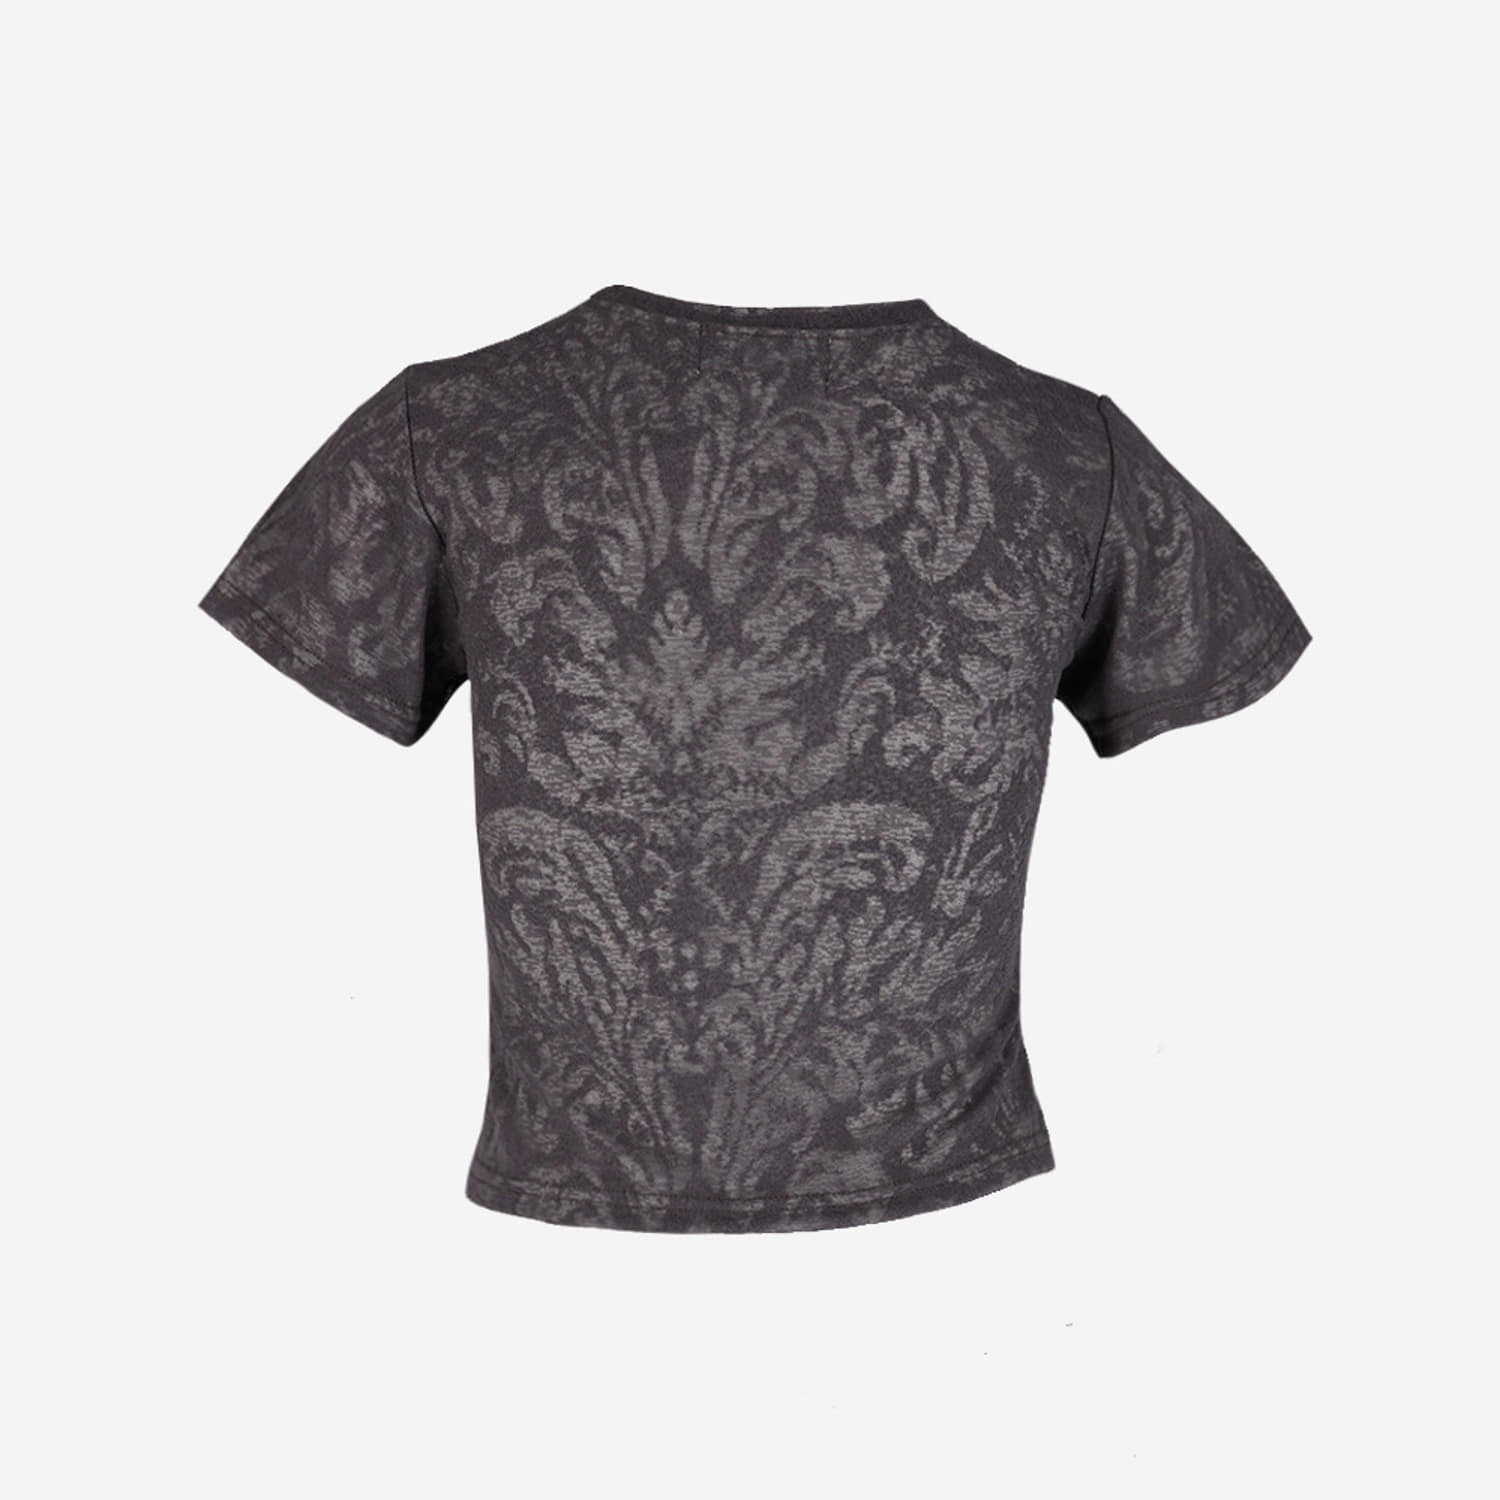 FLOWER T (CHARCOAL)